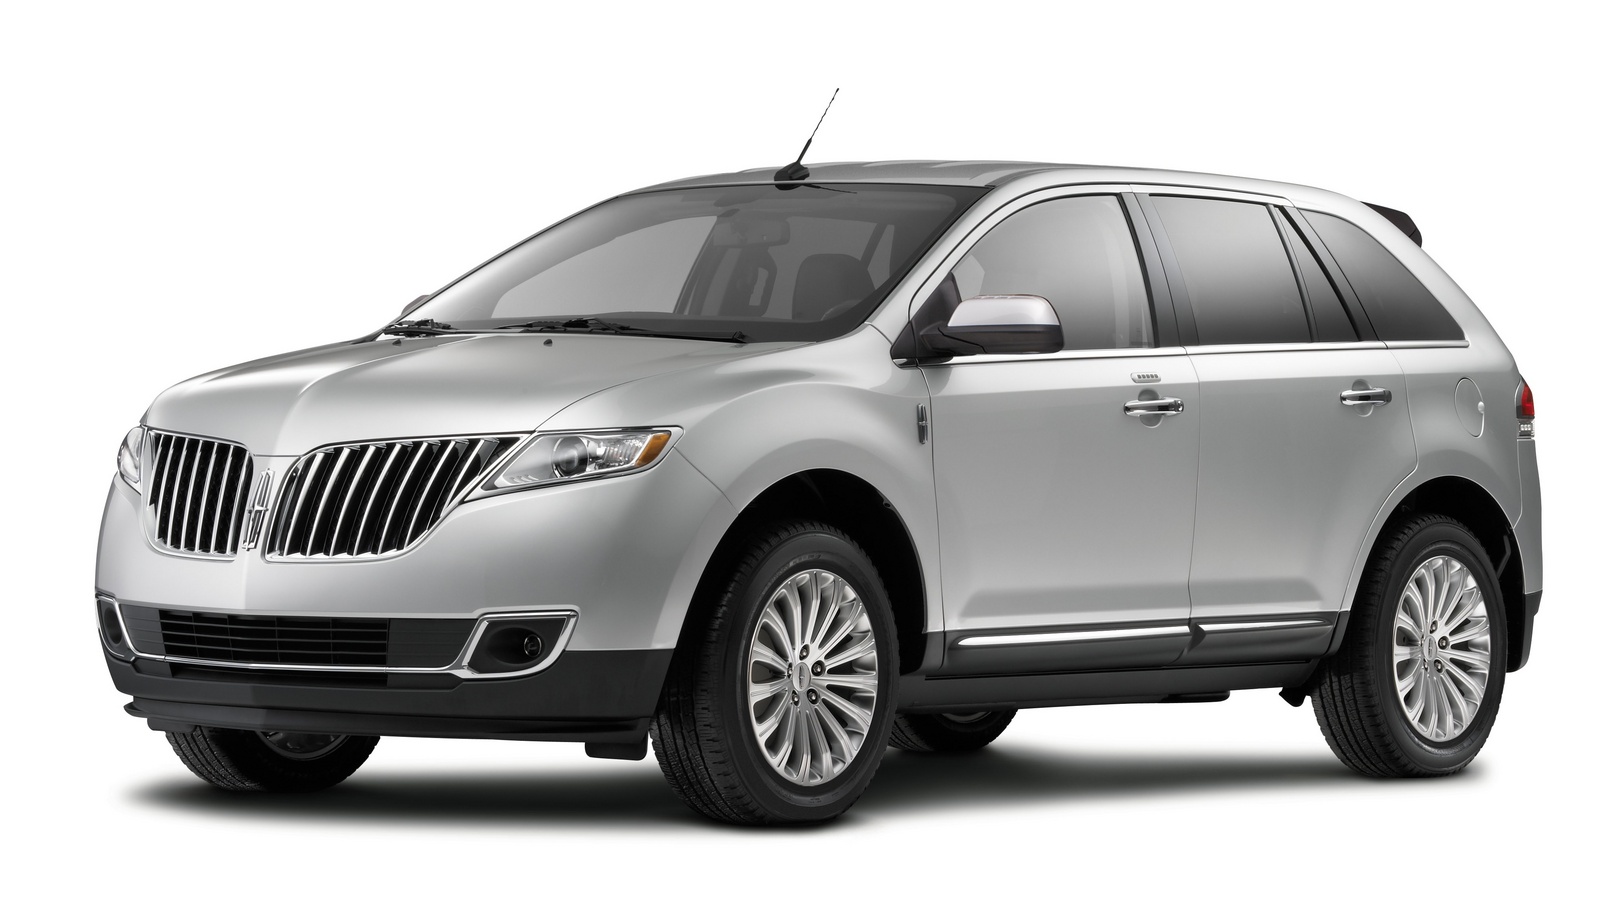 Ford lincoln mkx leasing rates canada #4